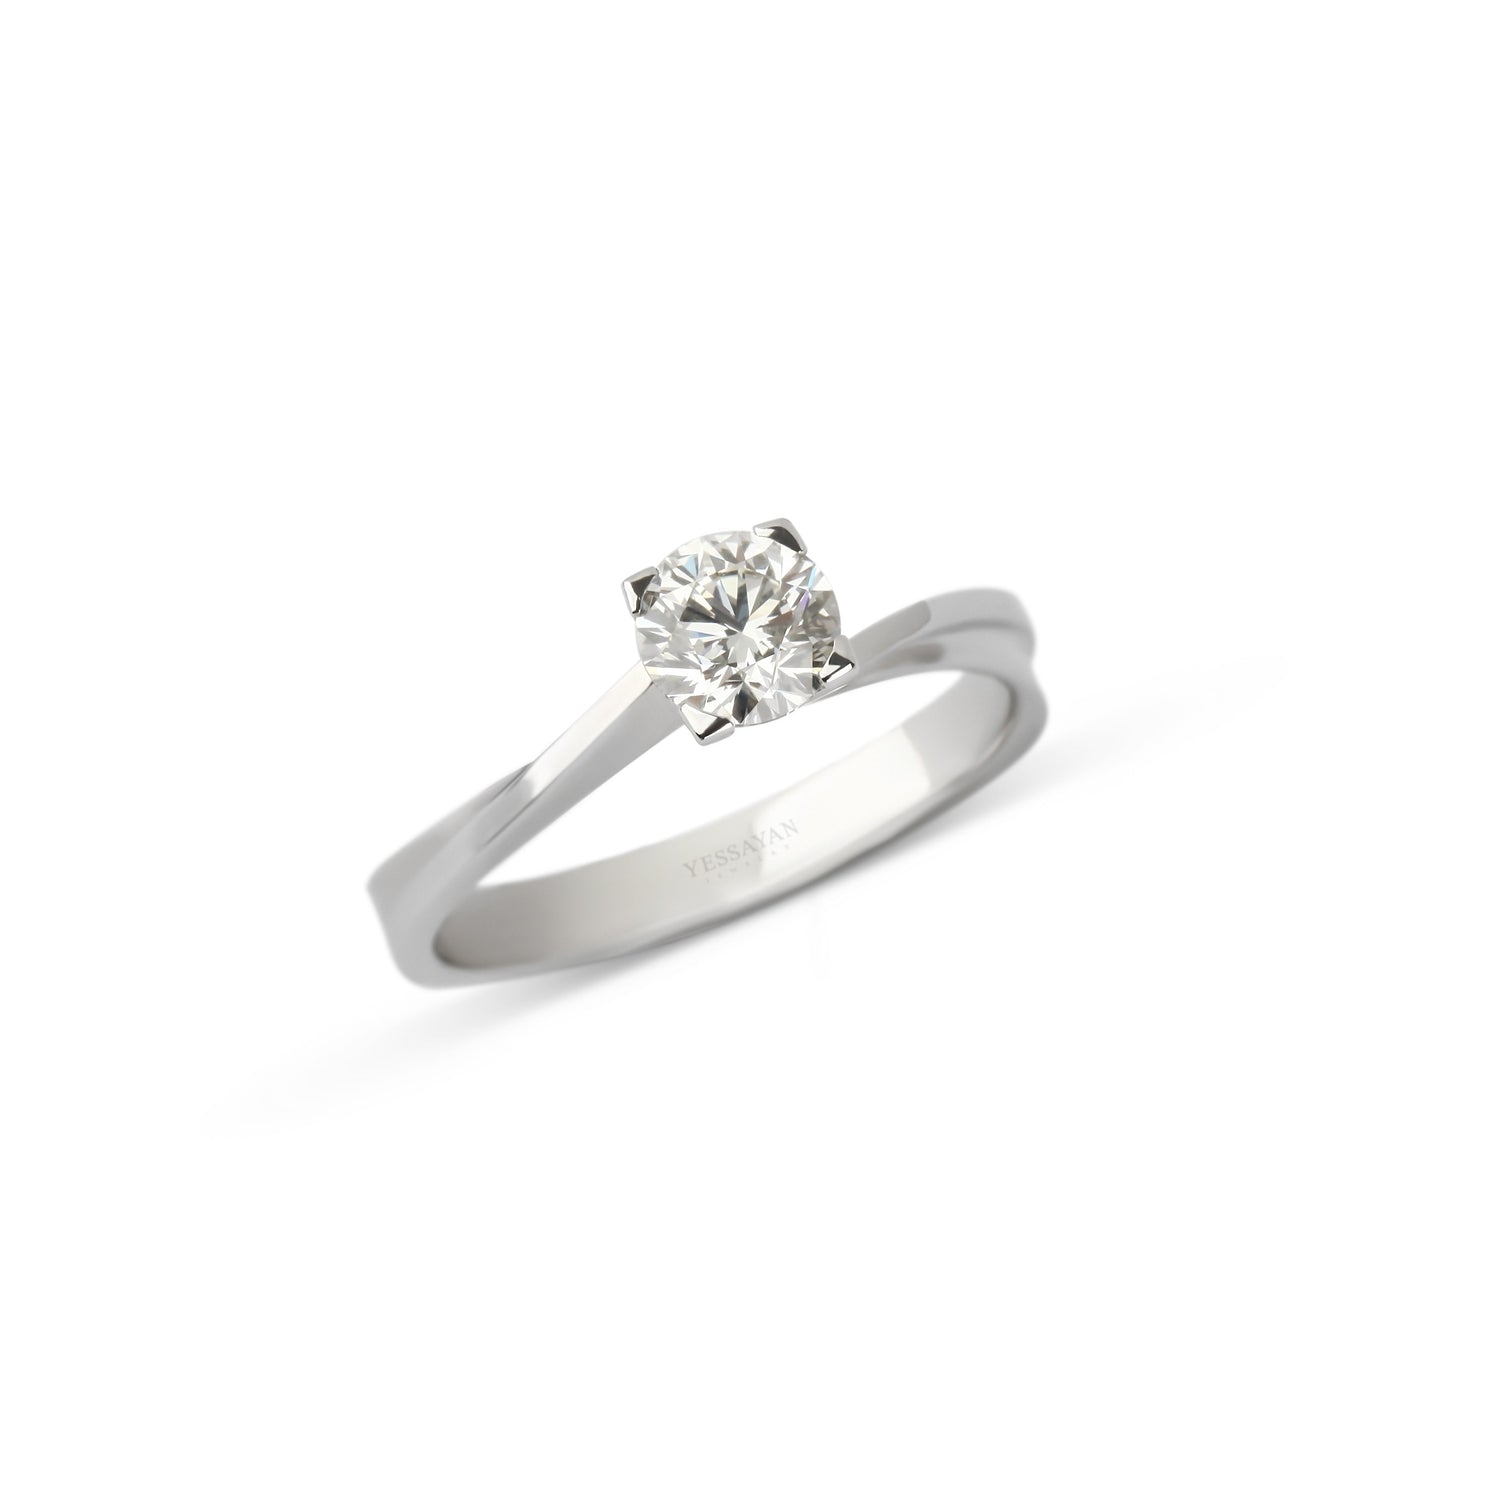 Certified Solitaire Diamond Ring | Solitaire ring | Wedding ring